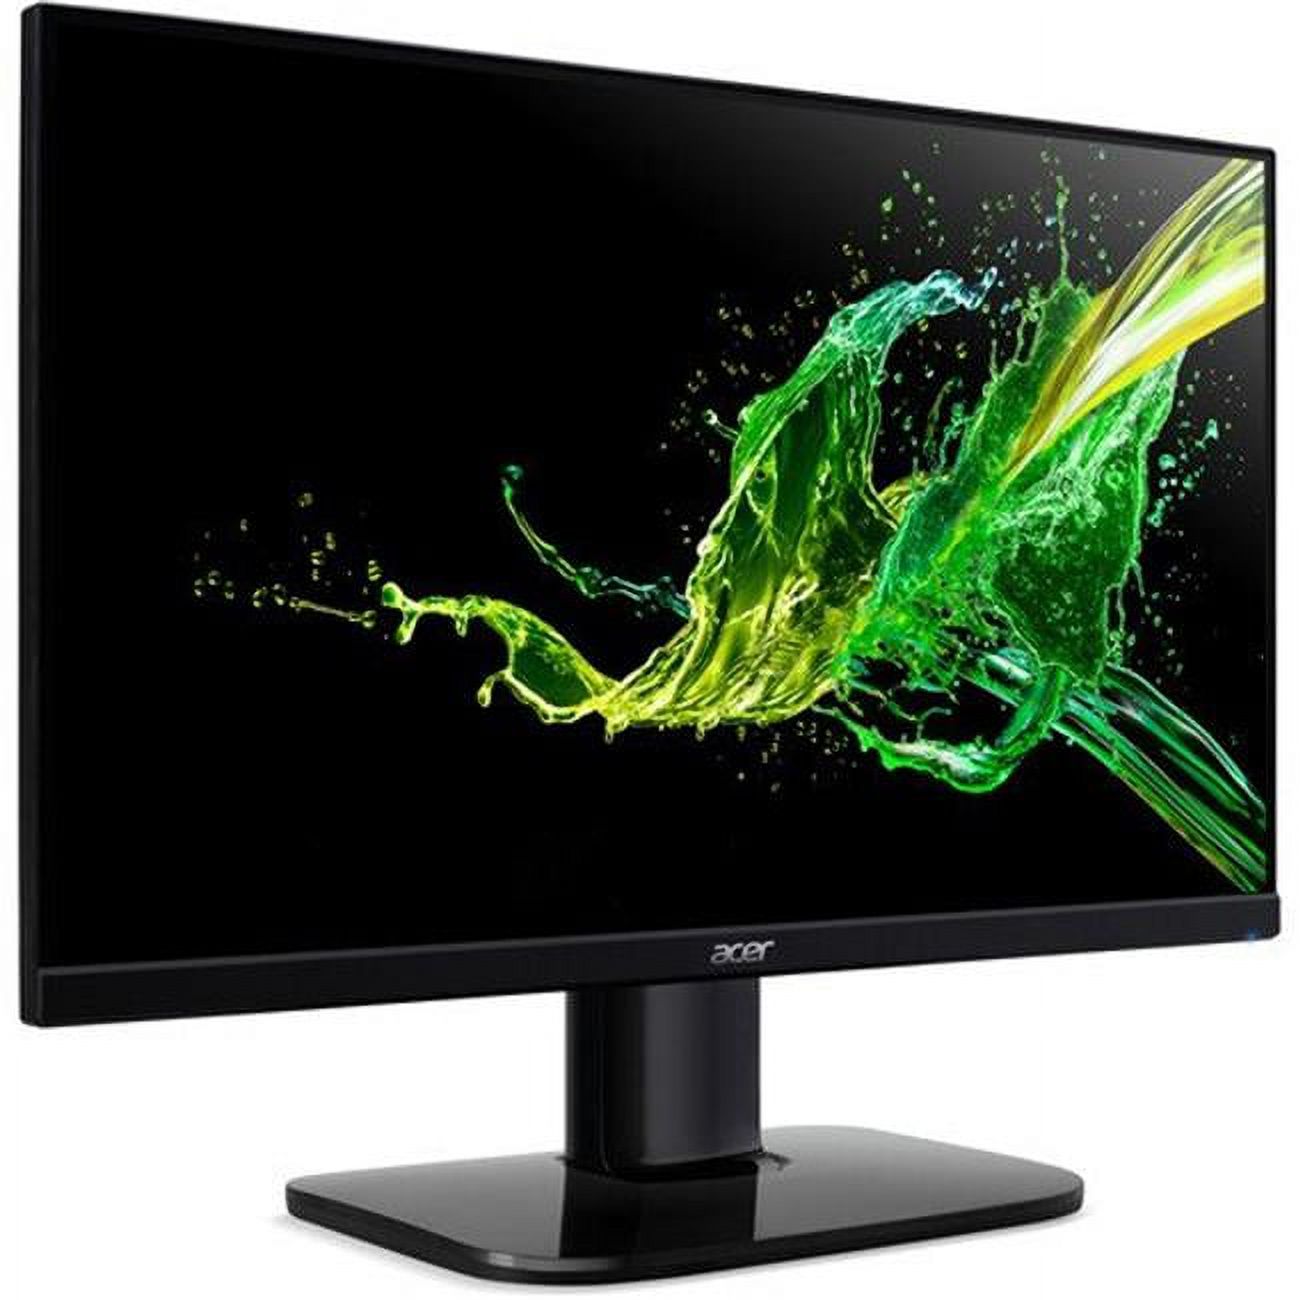 Acer KA272 A 27" Class LCD Monitor, Black - image 1 of 5